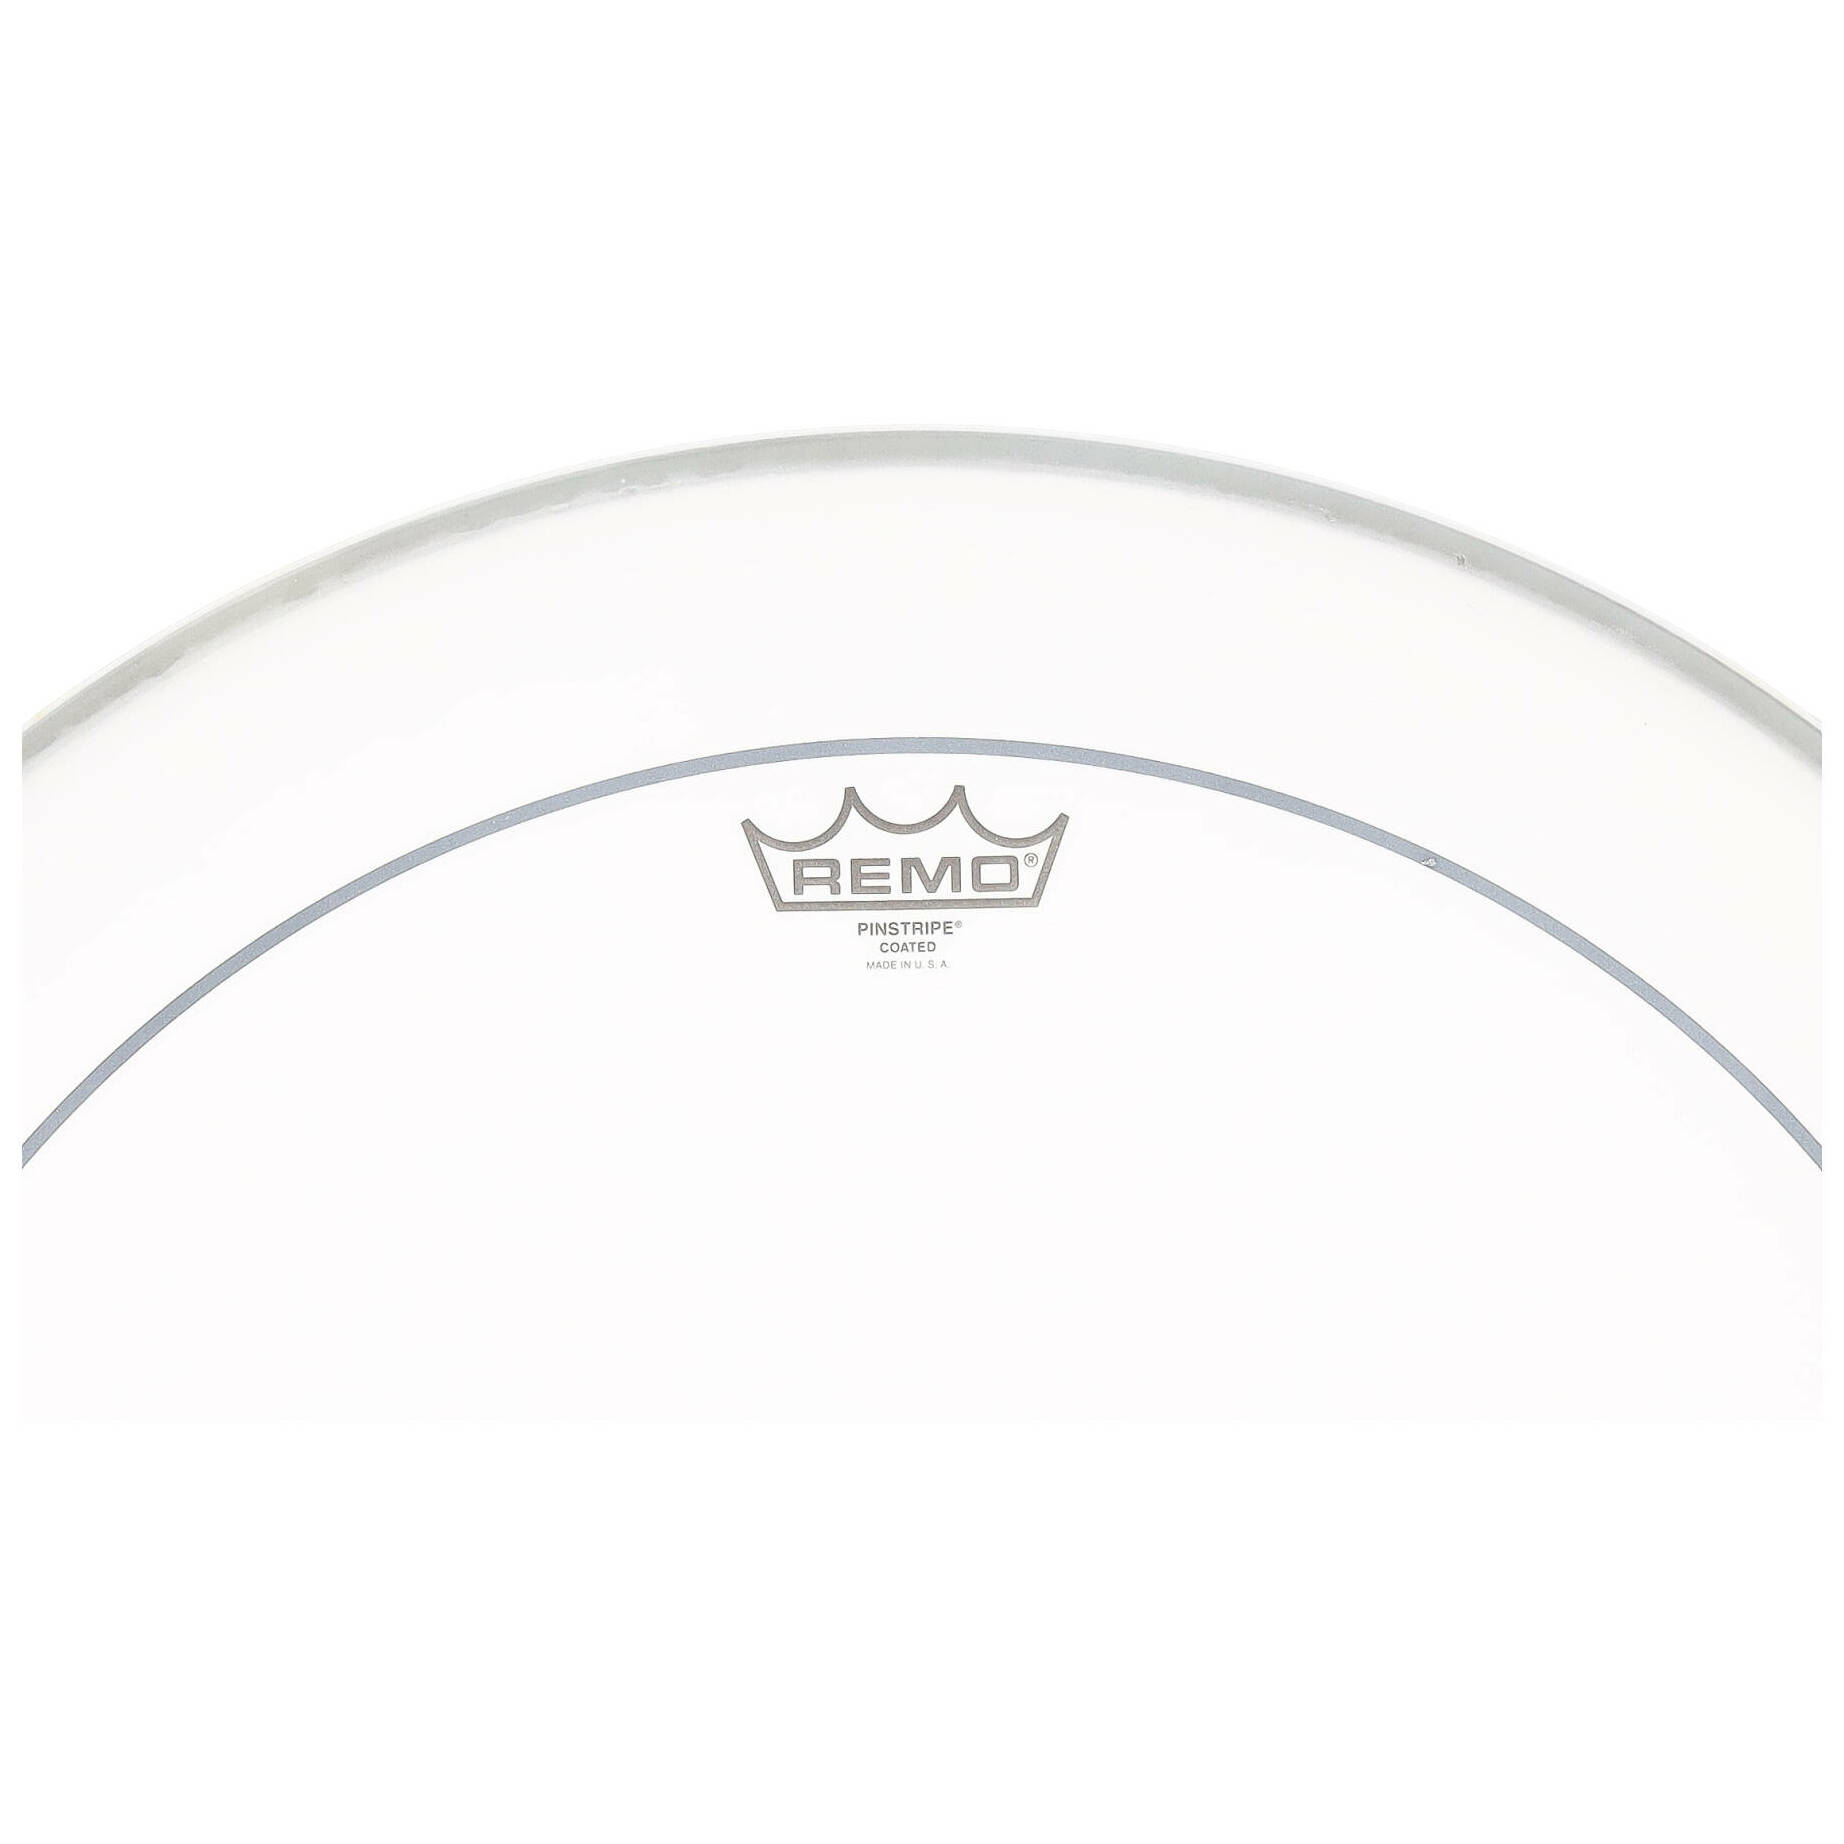 Remo Pinstripe - Bass Drum Fell - 22 Zoll - Coated 2